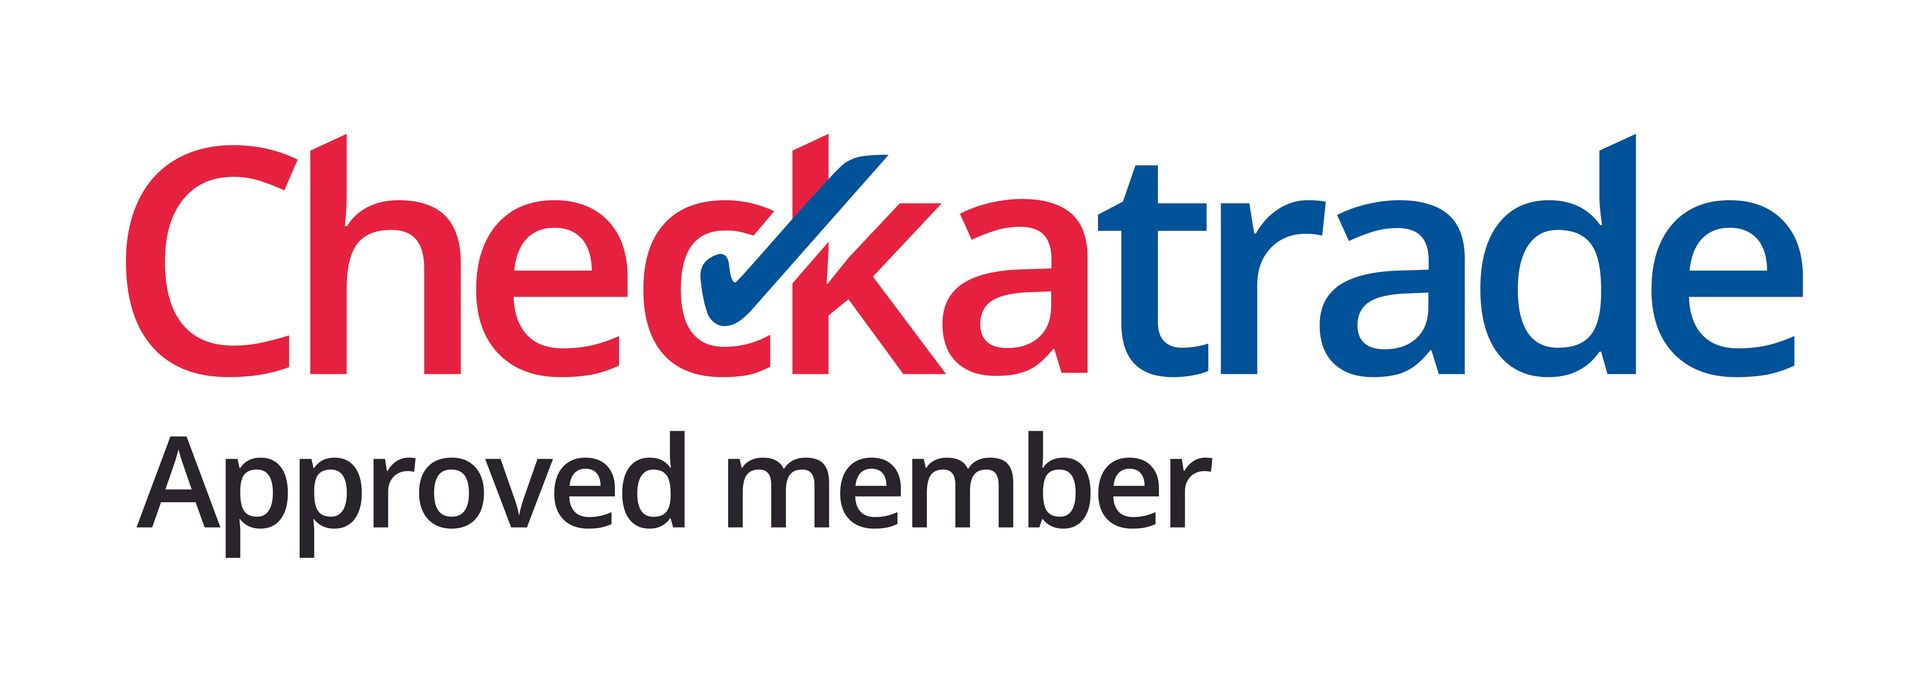 The checkatrade logo is red and blue and says checkatrade approved member.